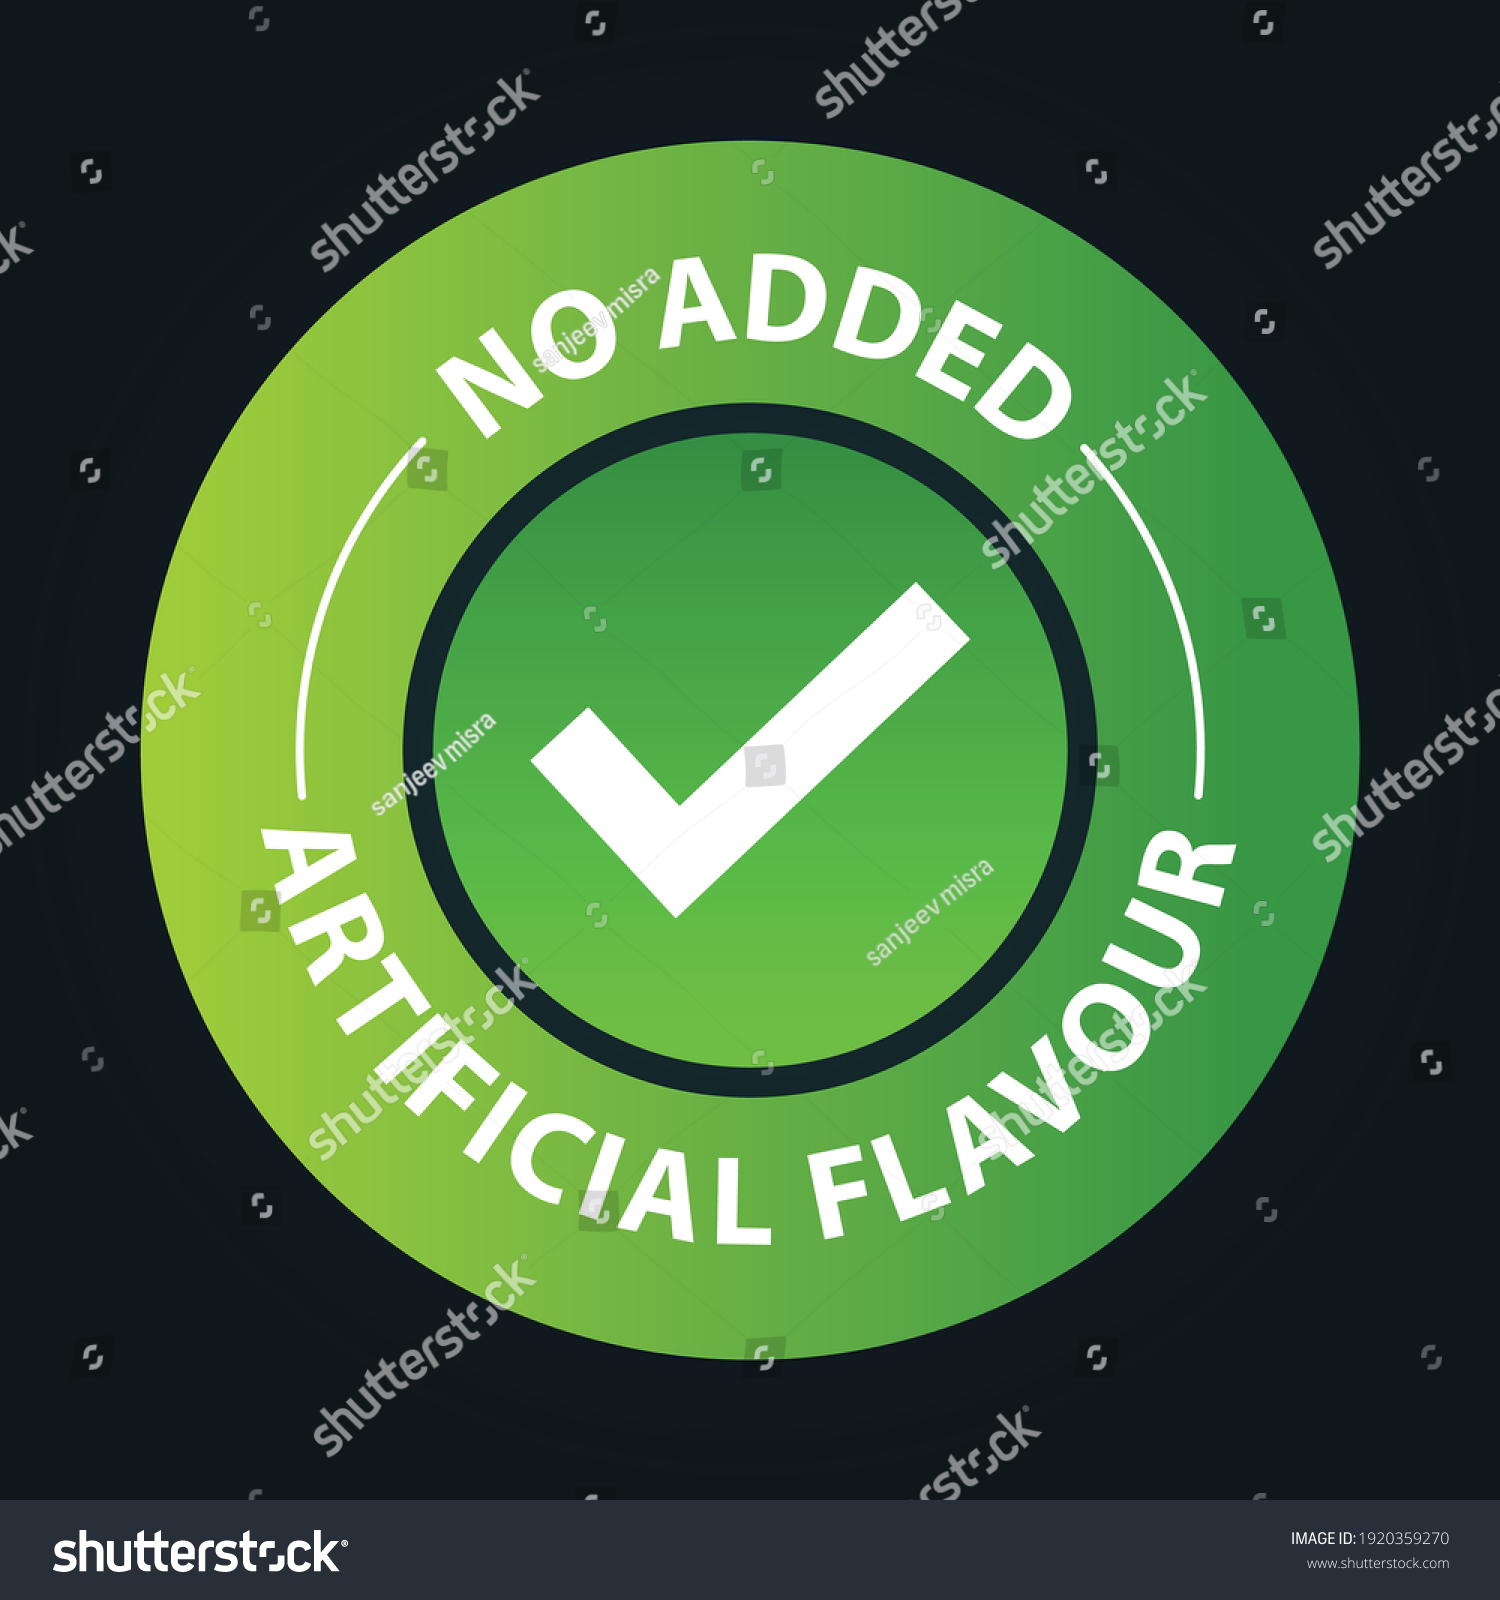 SVG of 'no added artificial flavor vector icon with tick mark,  green in color svg